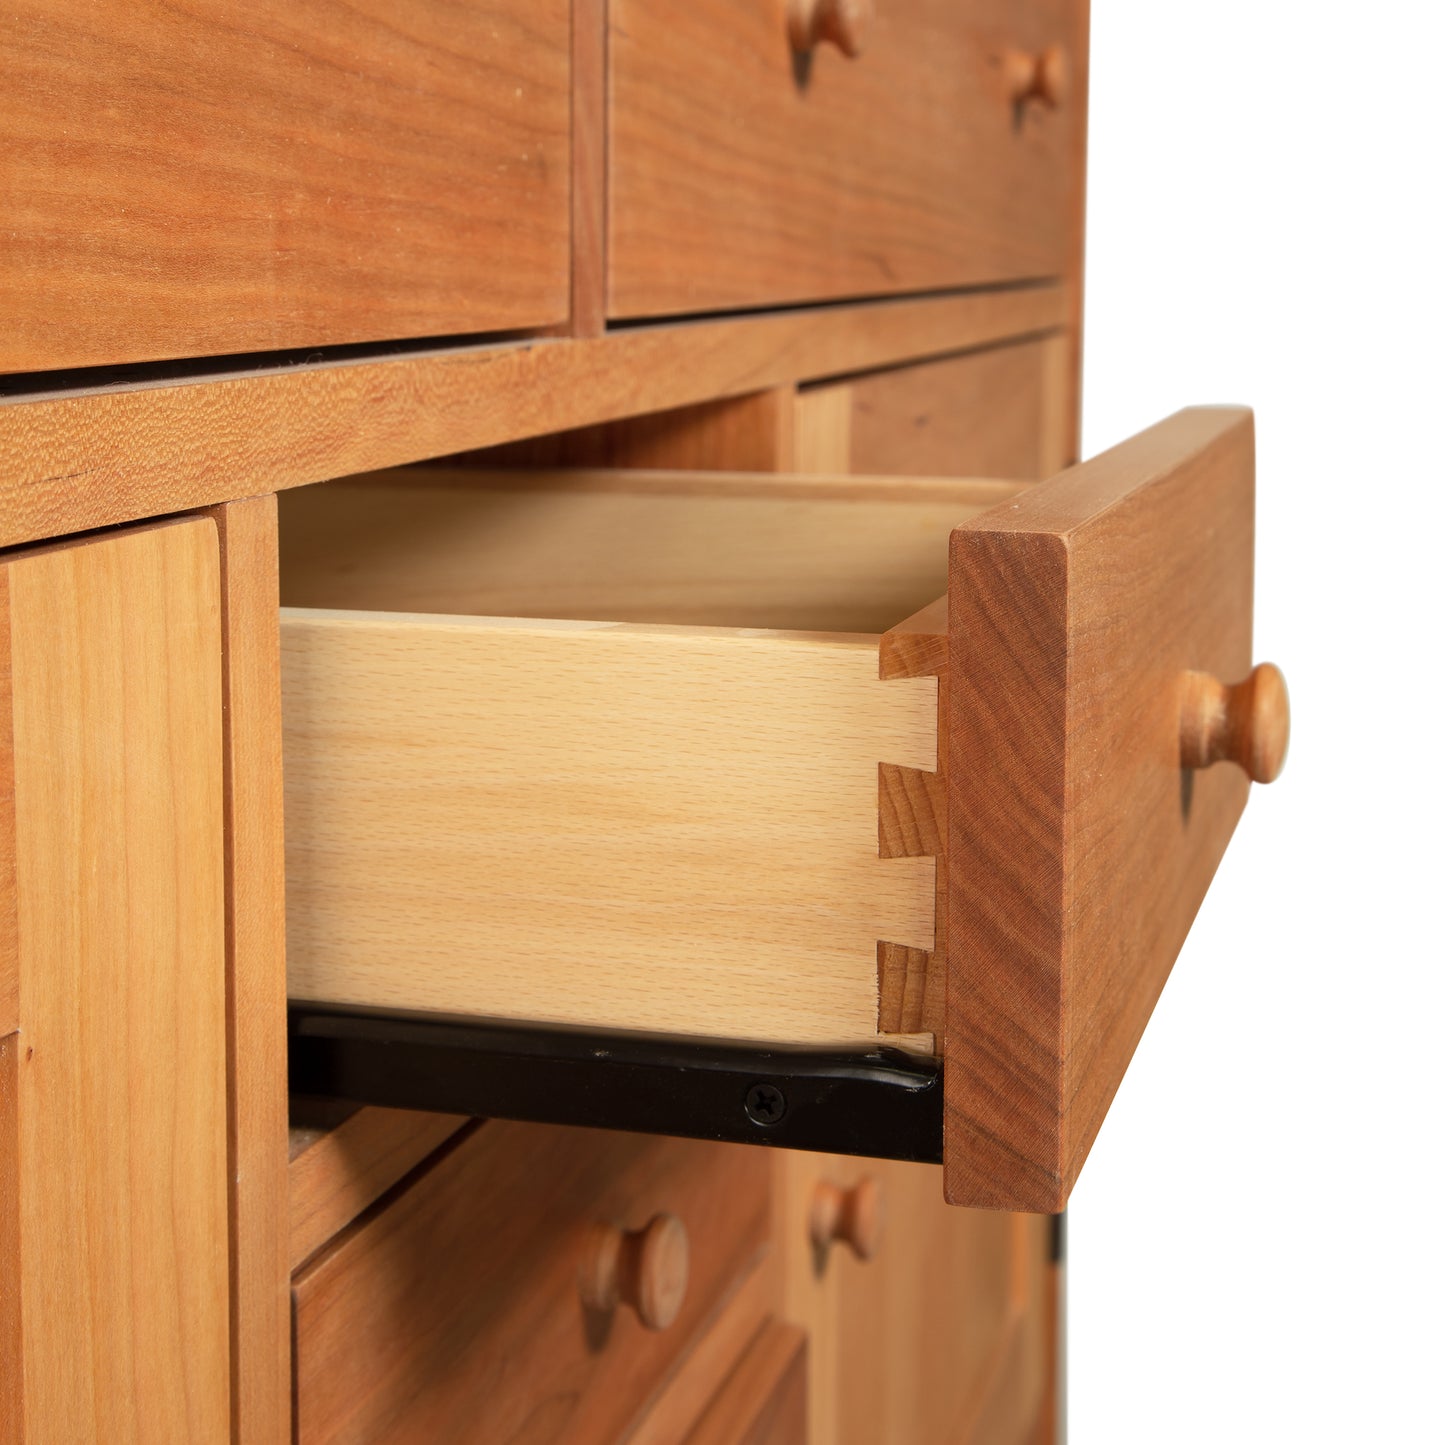 An open wooden drawer from a Vermont Furniture Designs Heartwood Shaker Sideboard showcasing dovetail joint construction and a black metal slide mechanism, set against a white background.